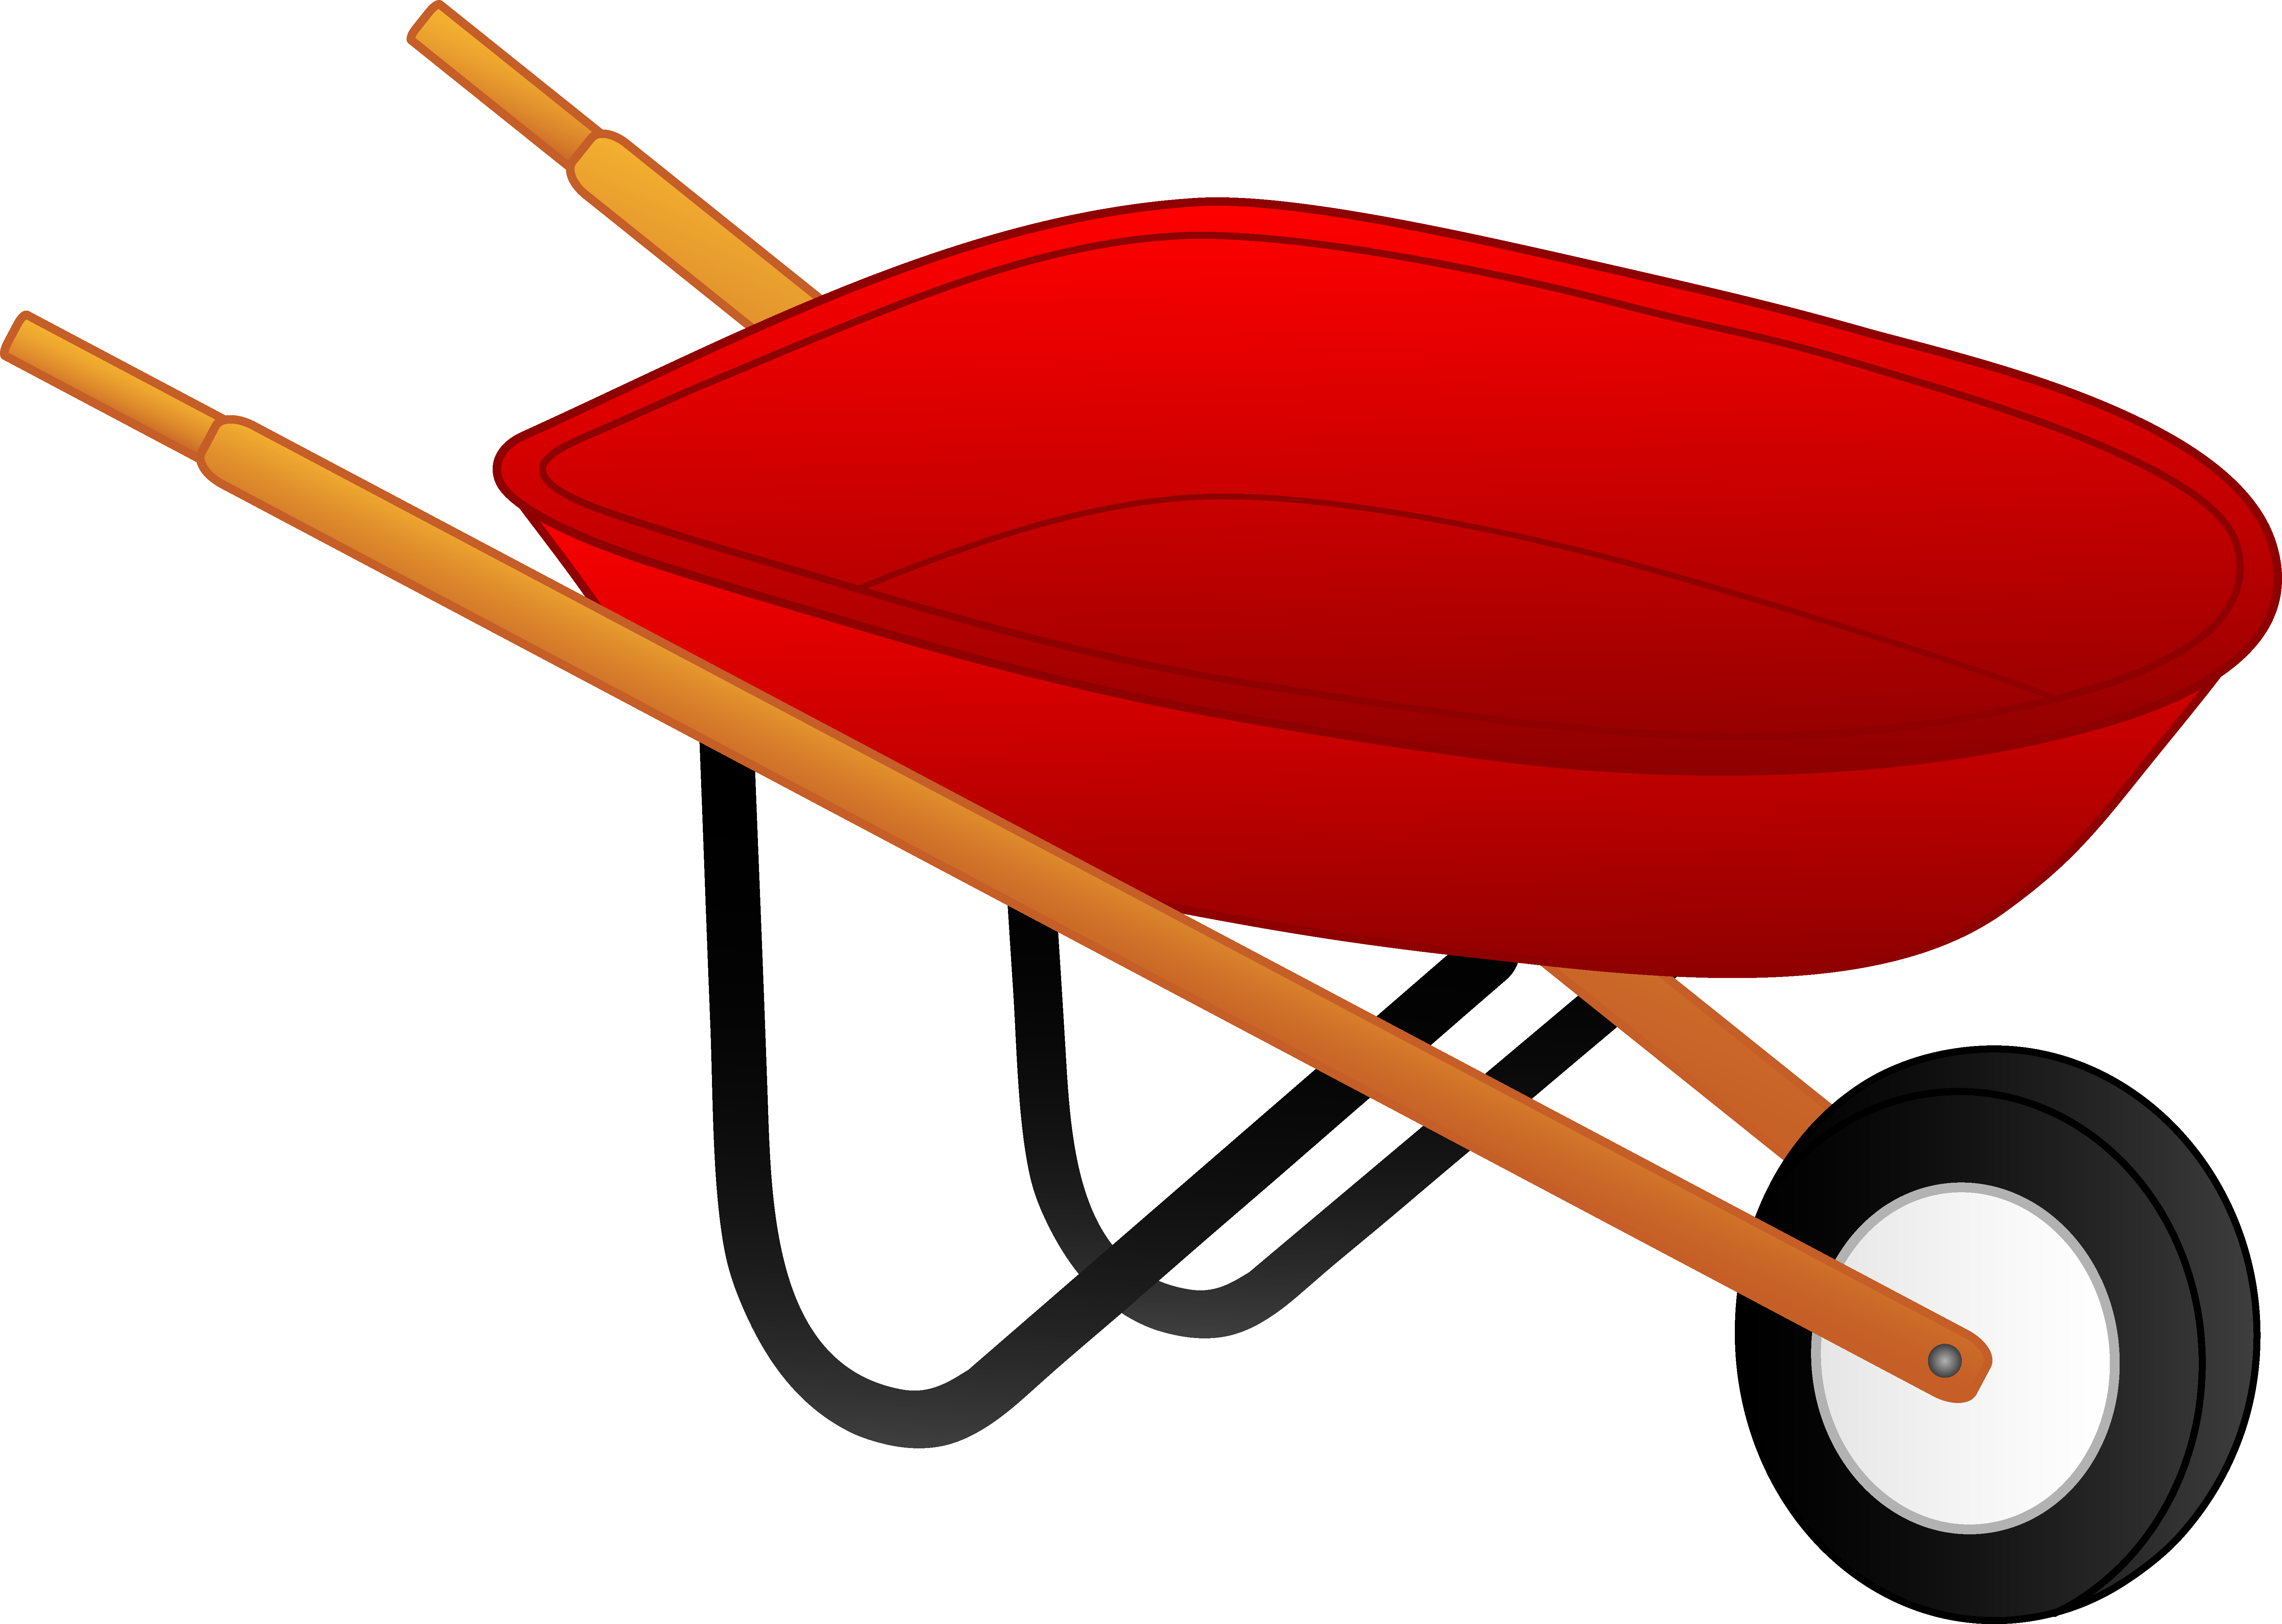 In Person With Wheelbarrow Clipart